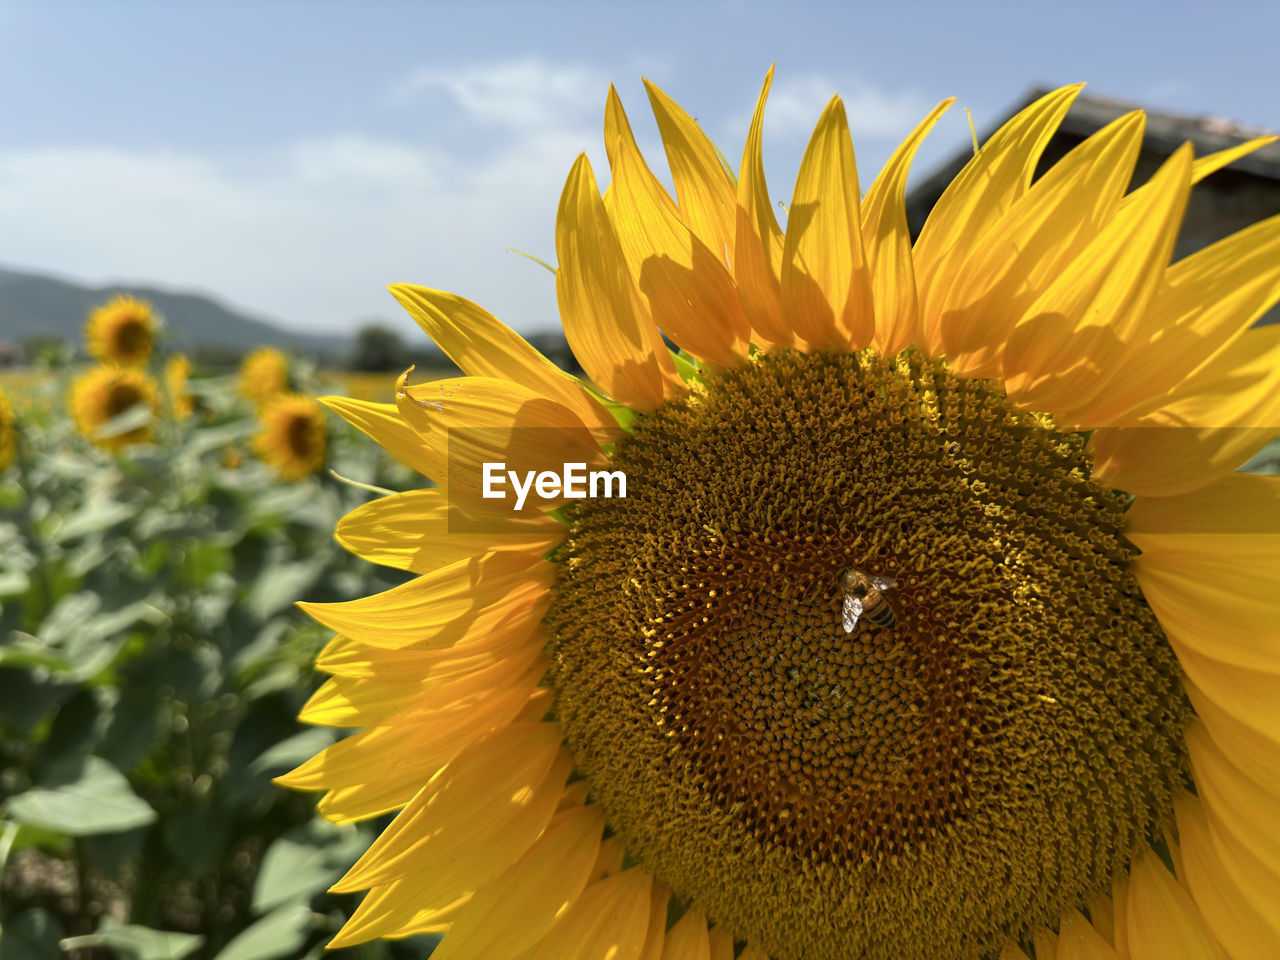 sunflower, flower, plant, flowering plant, yellow, beauty in nature, flower head, freshness, sky, nature, growth, petal, sunflower seed, field, inflorescence, close-up, landscape, rural scene, cloud, fragility, vegetarian food, land, agriculture, pollen, no people, crop, asterales, summer, seed, environment, outdoors, focus on foreground, farm, day, vibrant color, sunlight, blossom, springtime, botany, scenics - nature, macro, plant part, leaf, extreme close-up, animal wildlife